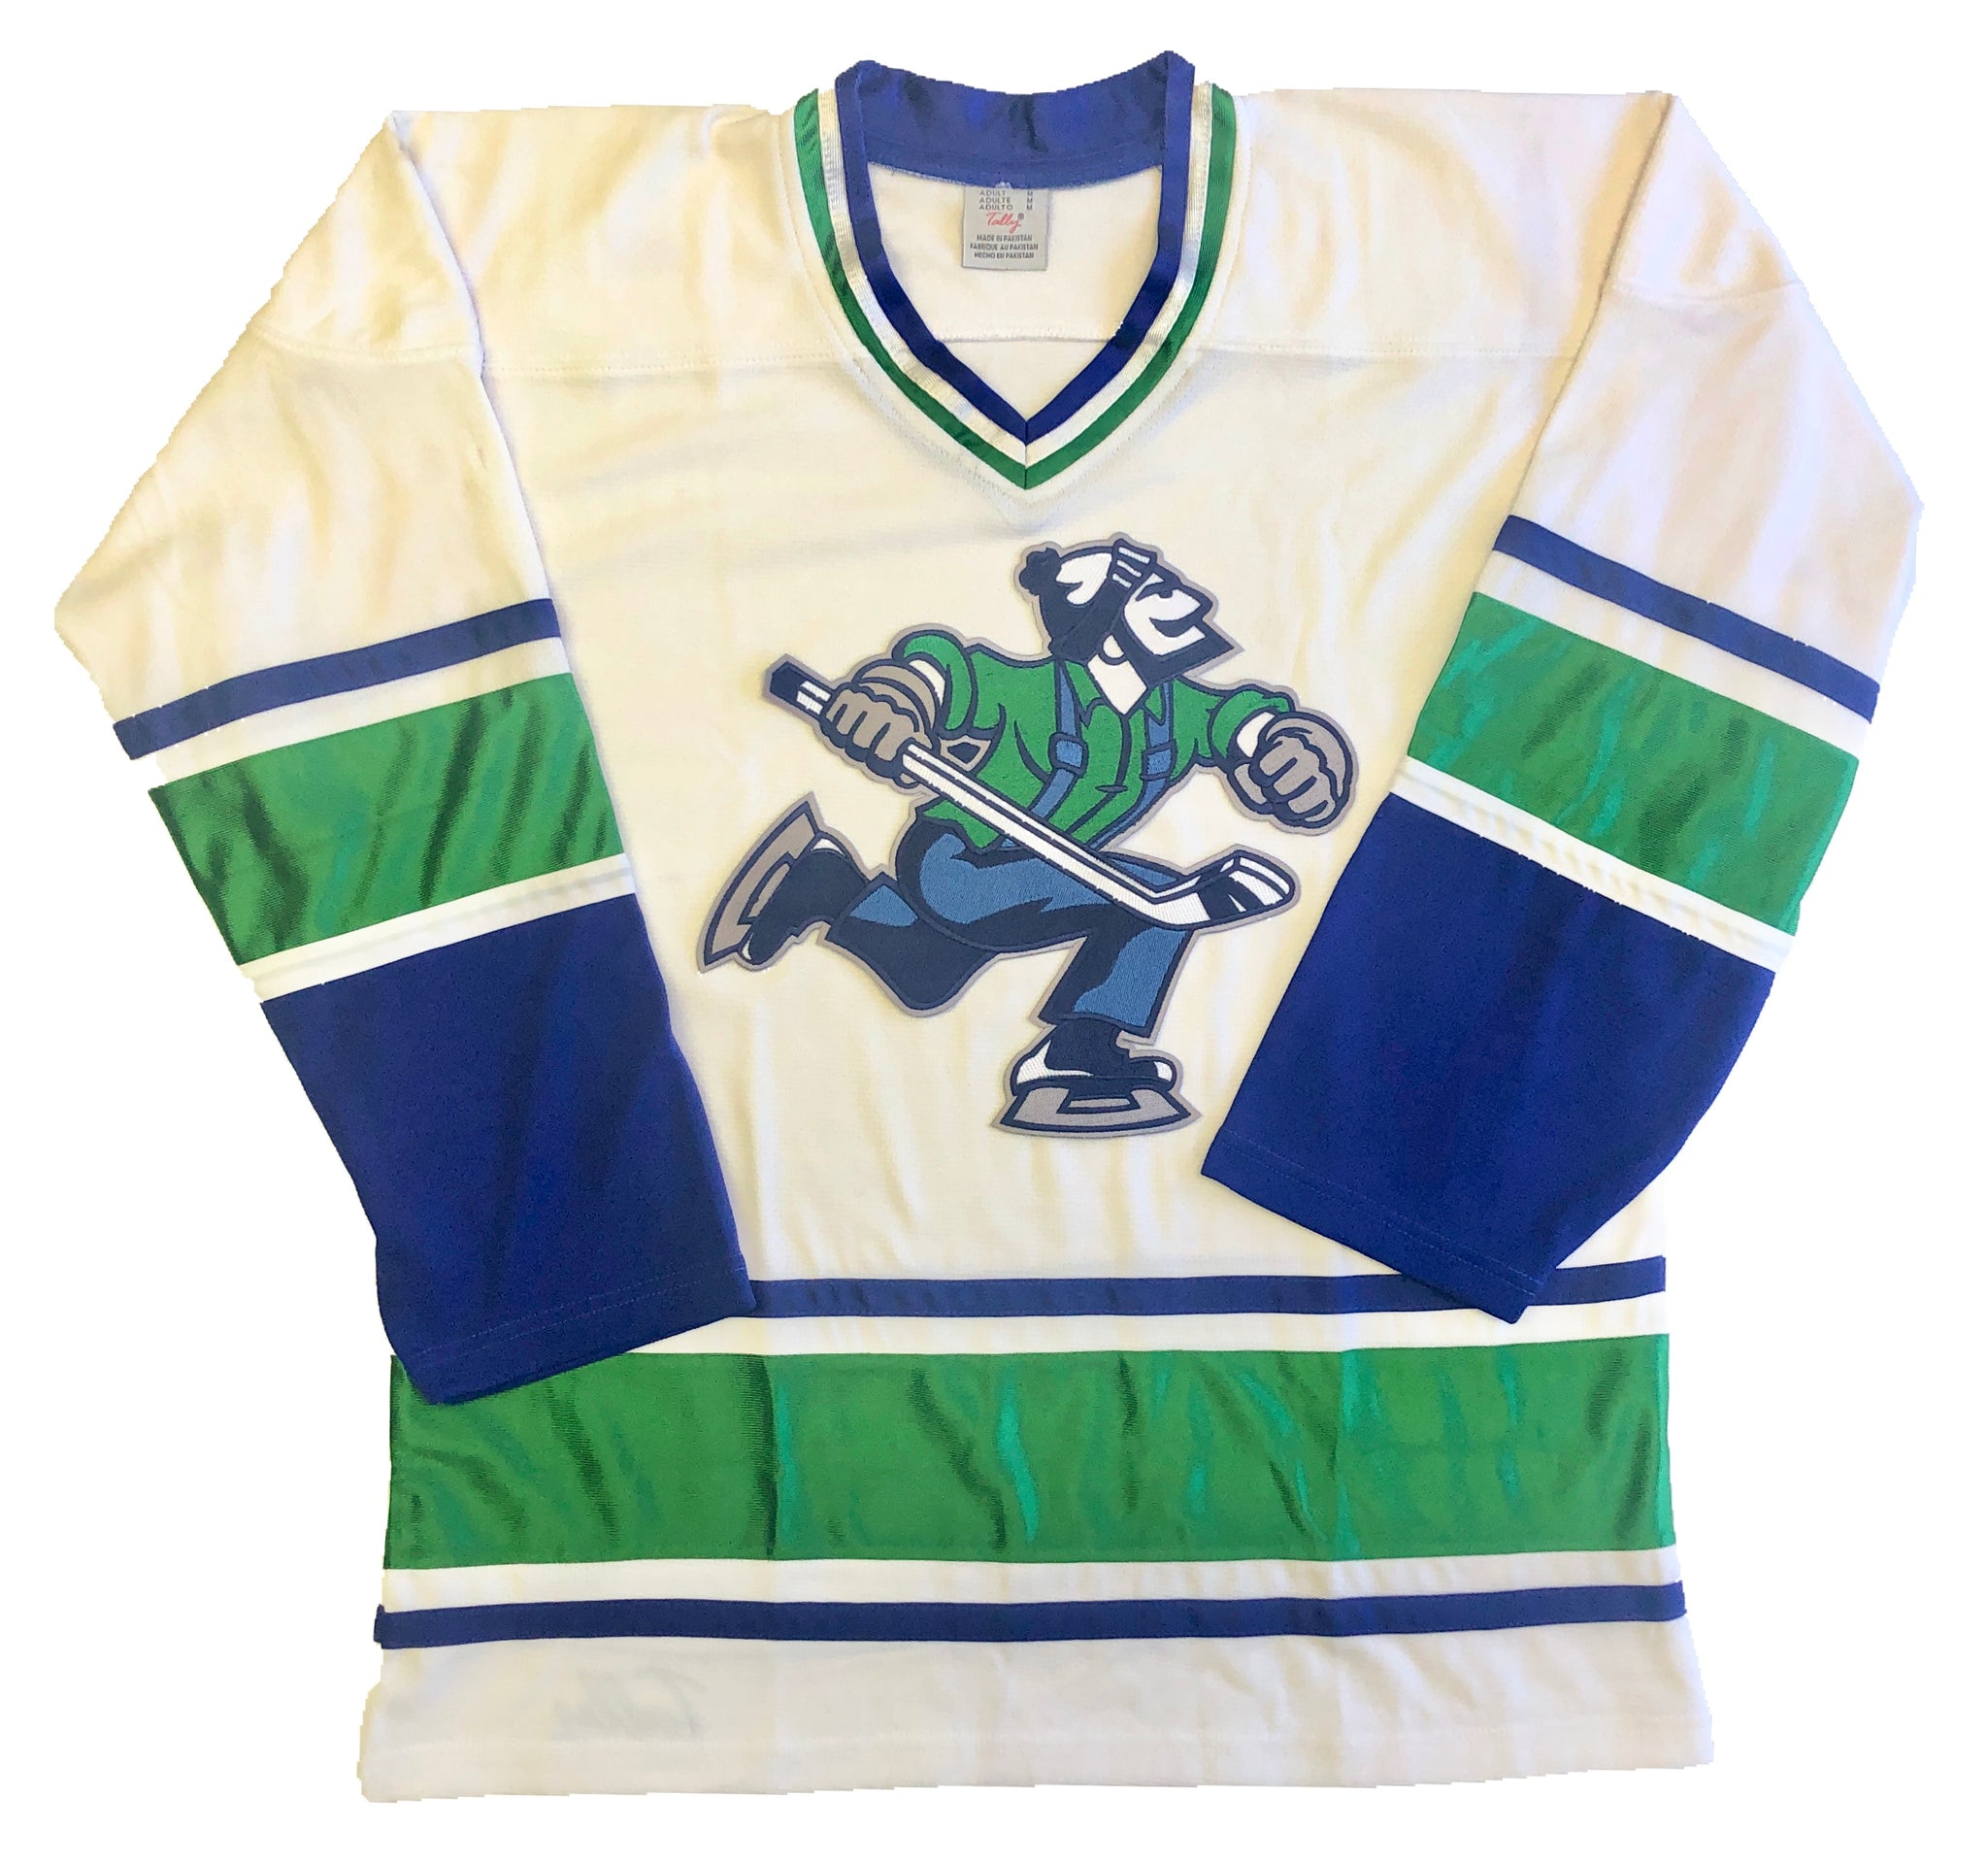 VANCOUVER CANUCKS THROWBACK NHL HOCKEY JERSEY SIZE LARGE ADULT